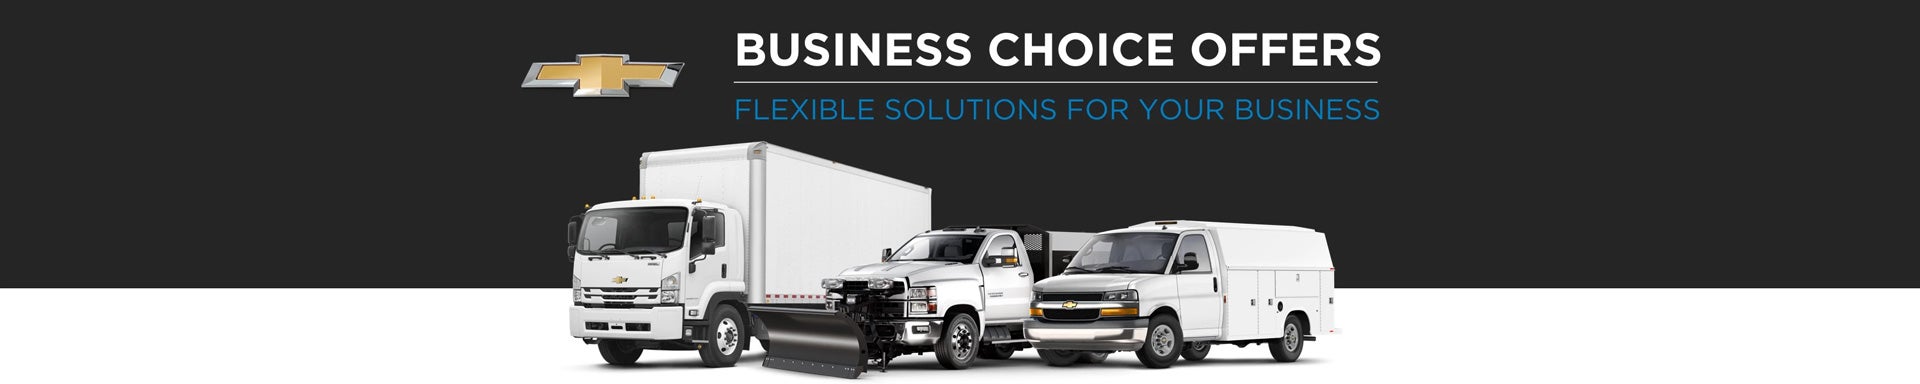 Chevrolet Business Choice Offers - Flexible Solutions for your Business - Beaty Chevrolet in KNOXVILLE TN